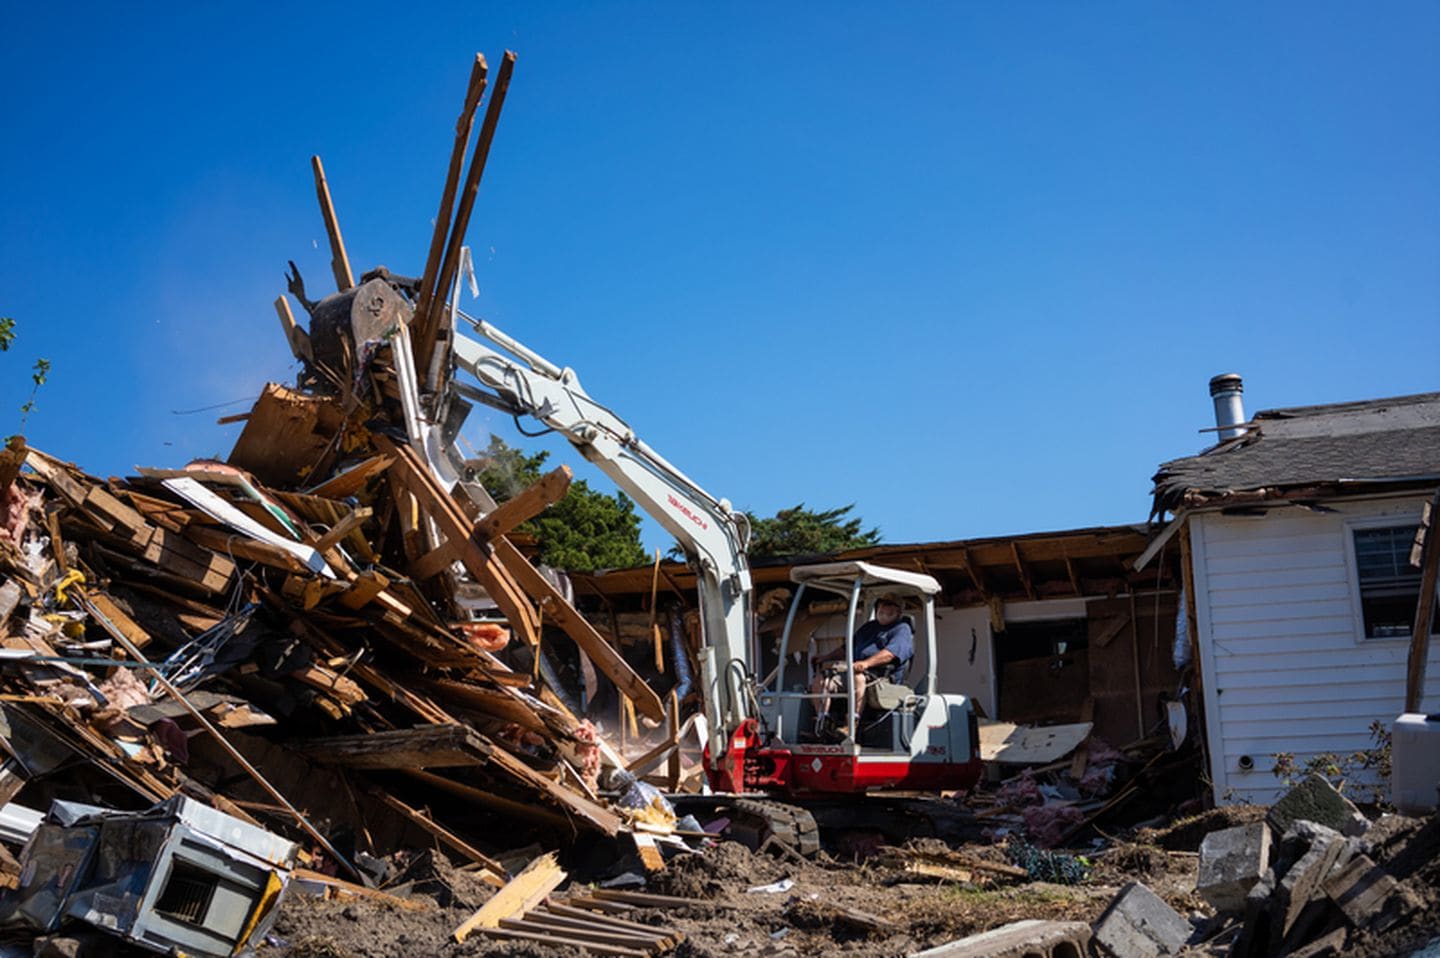 The home of Edward and Stella O’Neal is torn down due to damage caused by flooding during Hurricane Dorian in Ocracoke, North Carolina. Photo: Daniel Pullen / The Washington Post